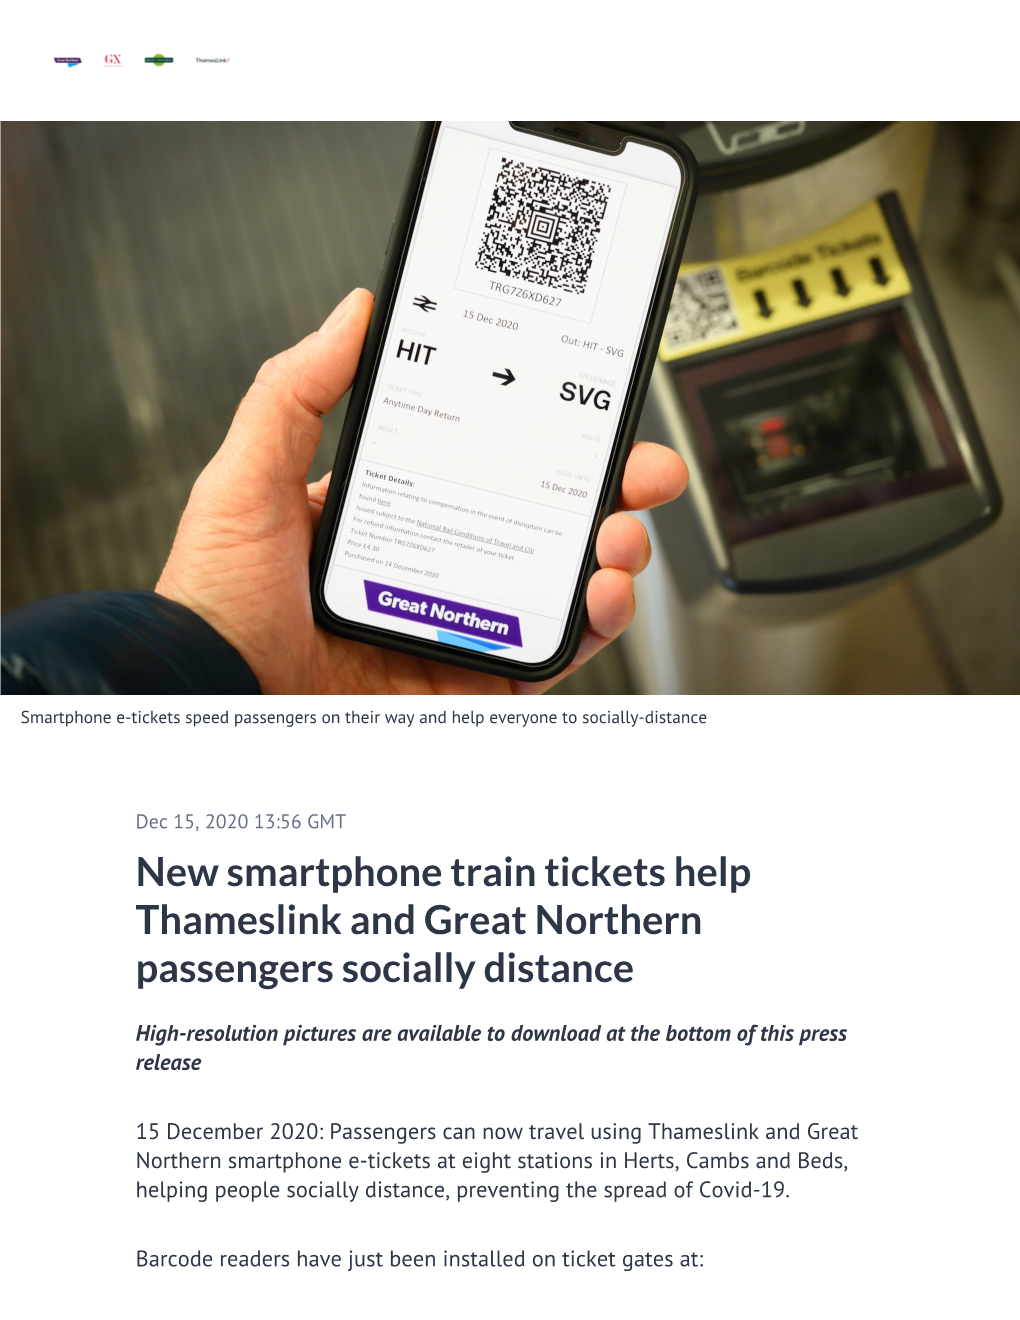 New Smartphone Train Tickets Help Thameslink and Great Northern Passengers Socially Distance